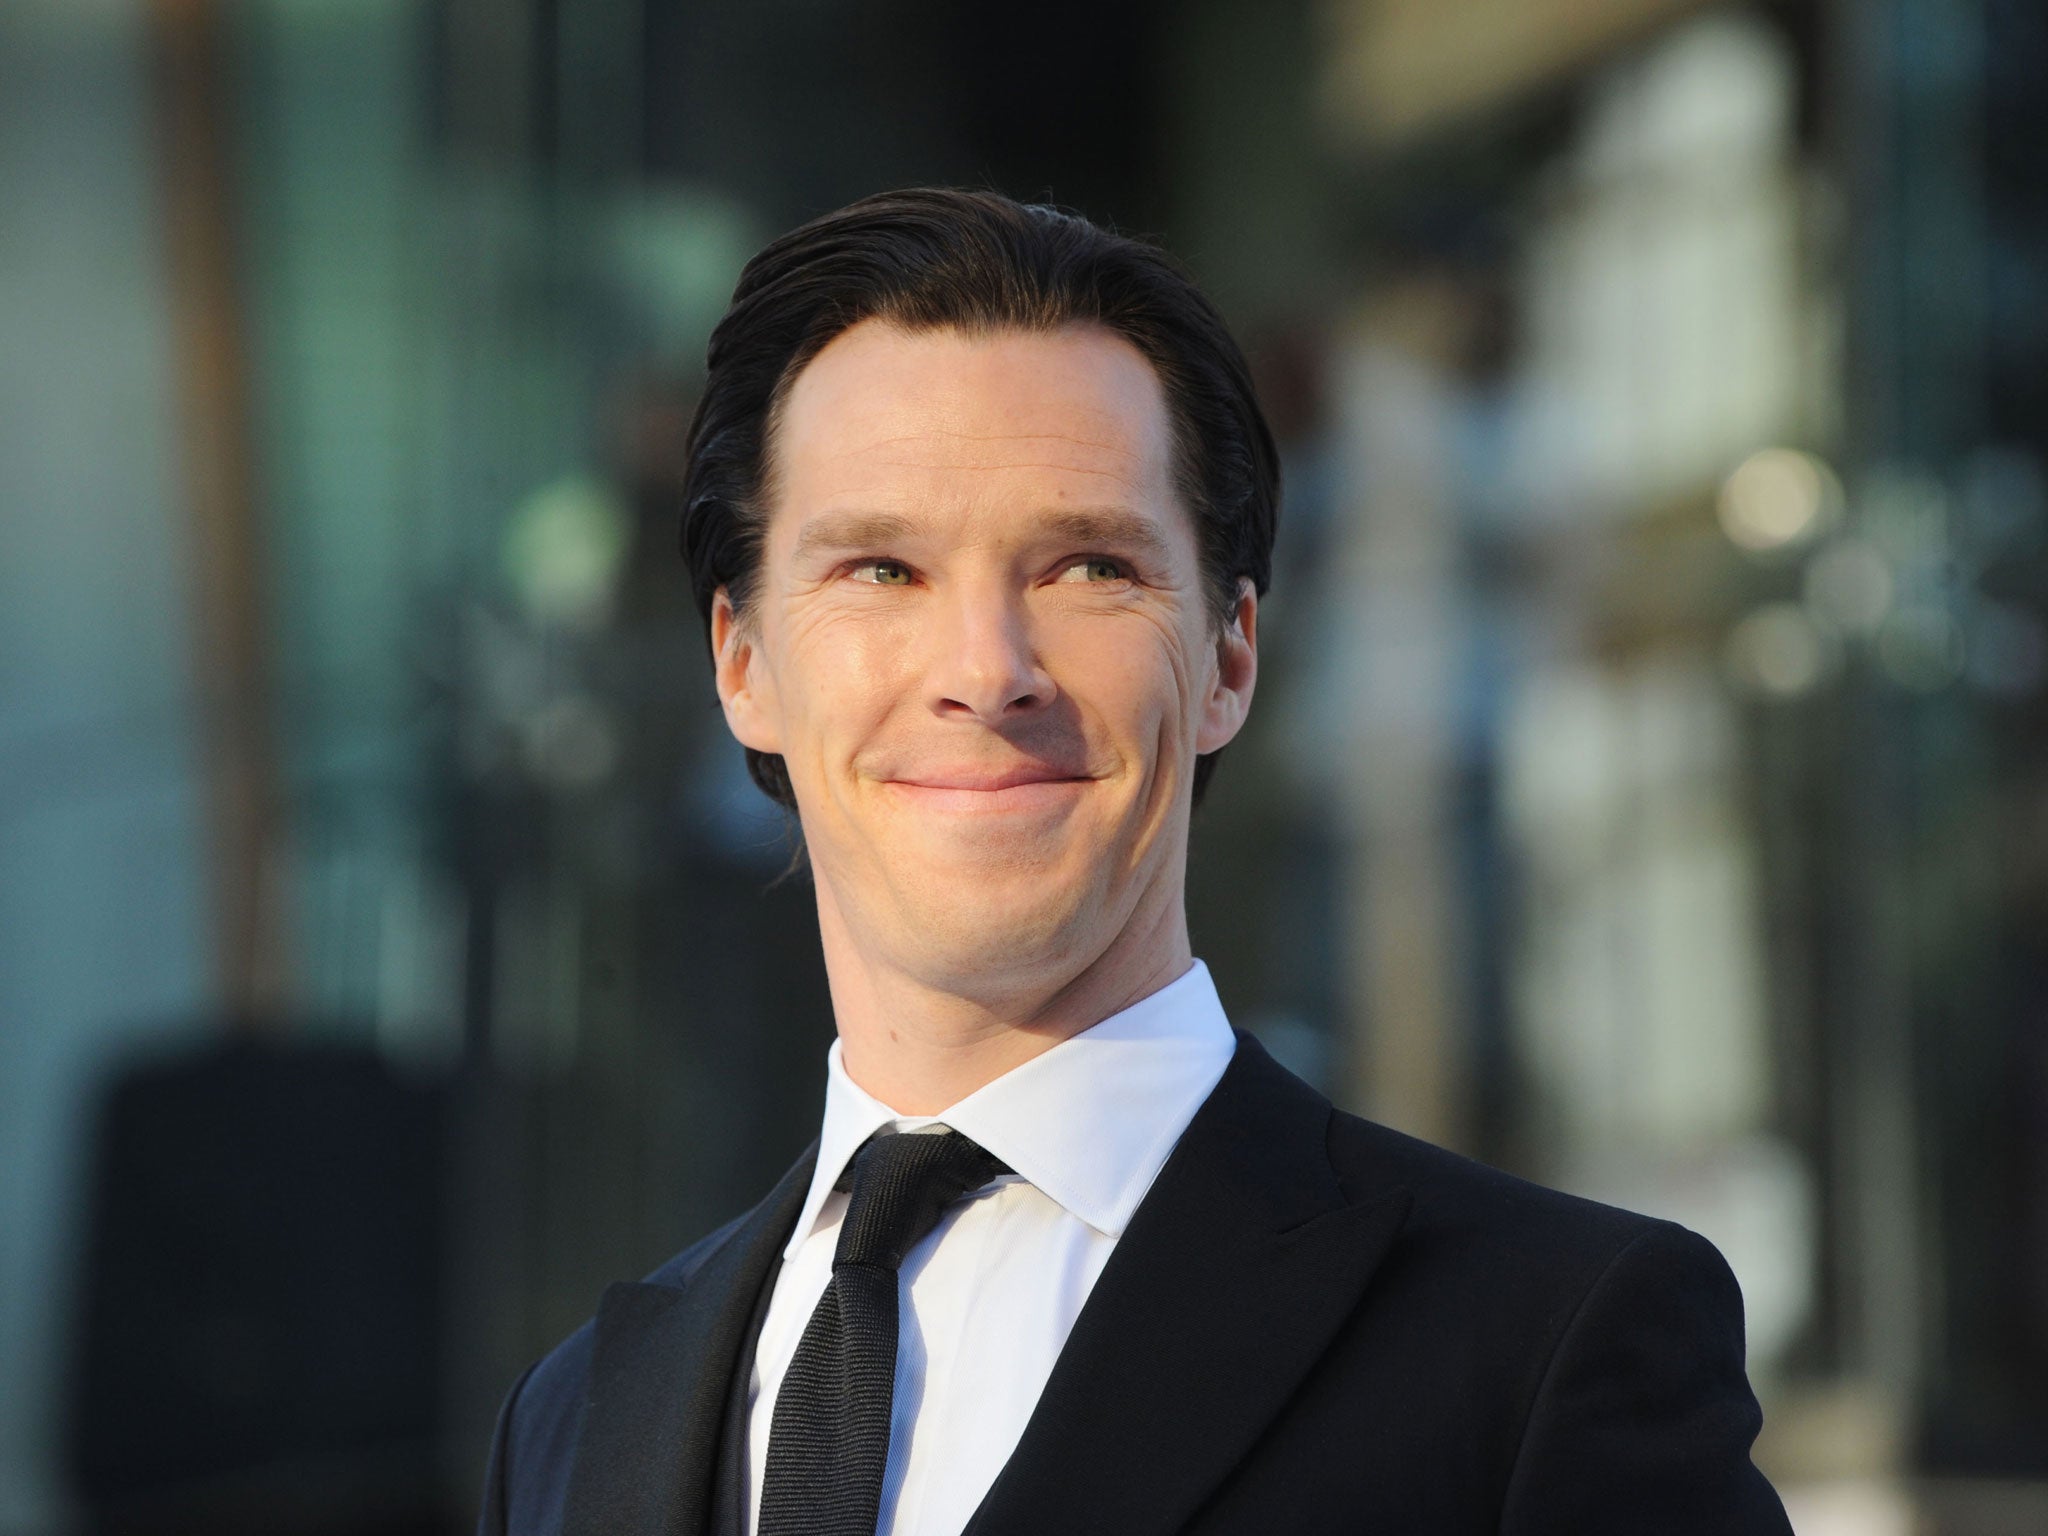 Benedict Cumberbatch wants to shake up his acting roles and play someone 'really dumb'